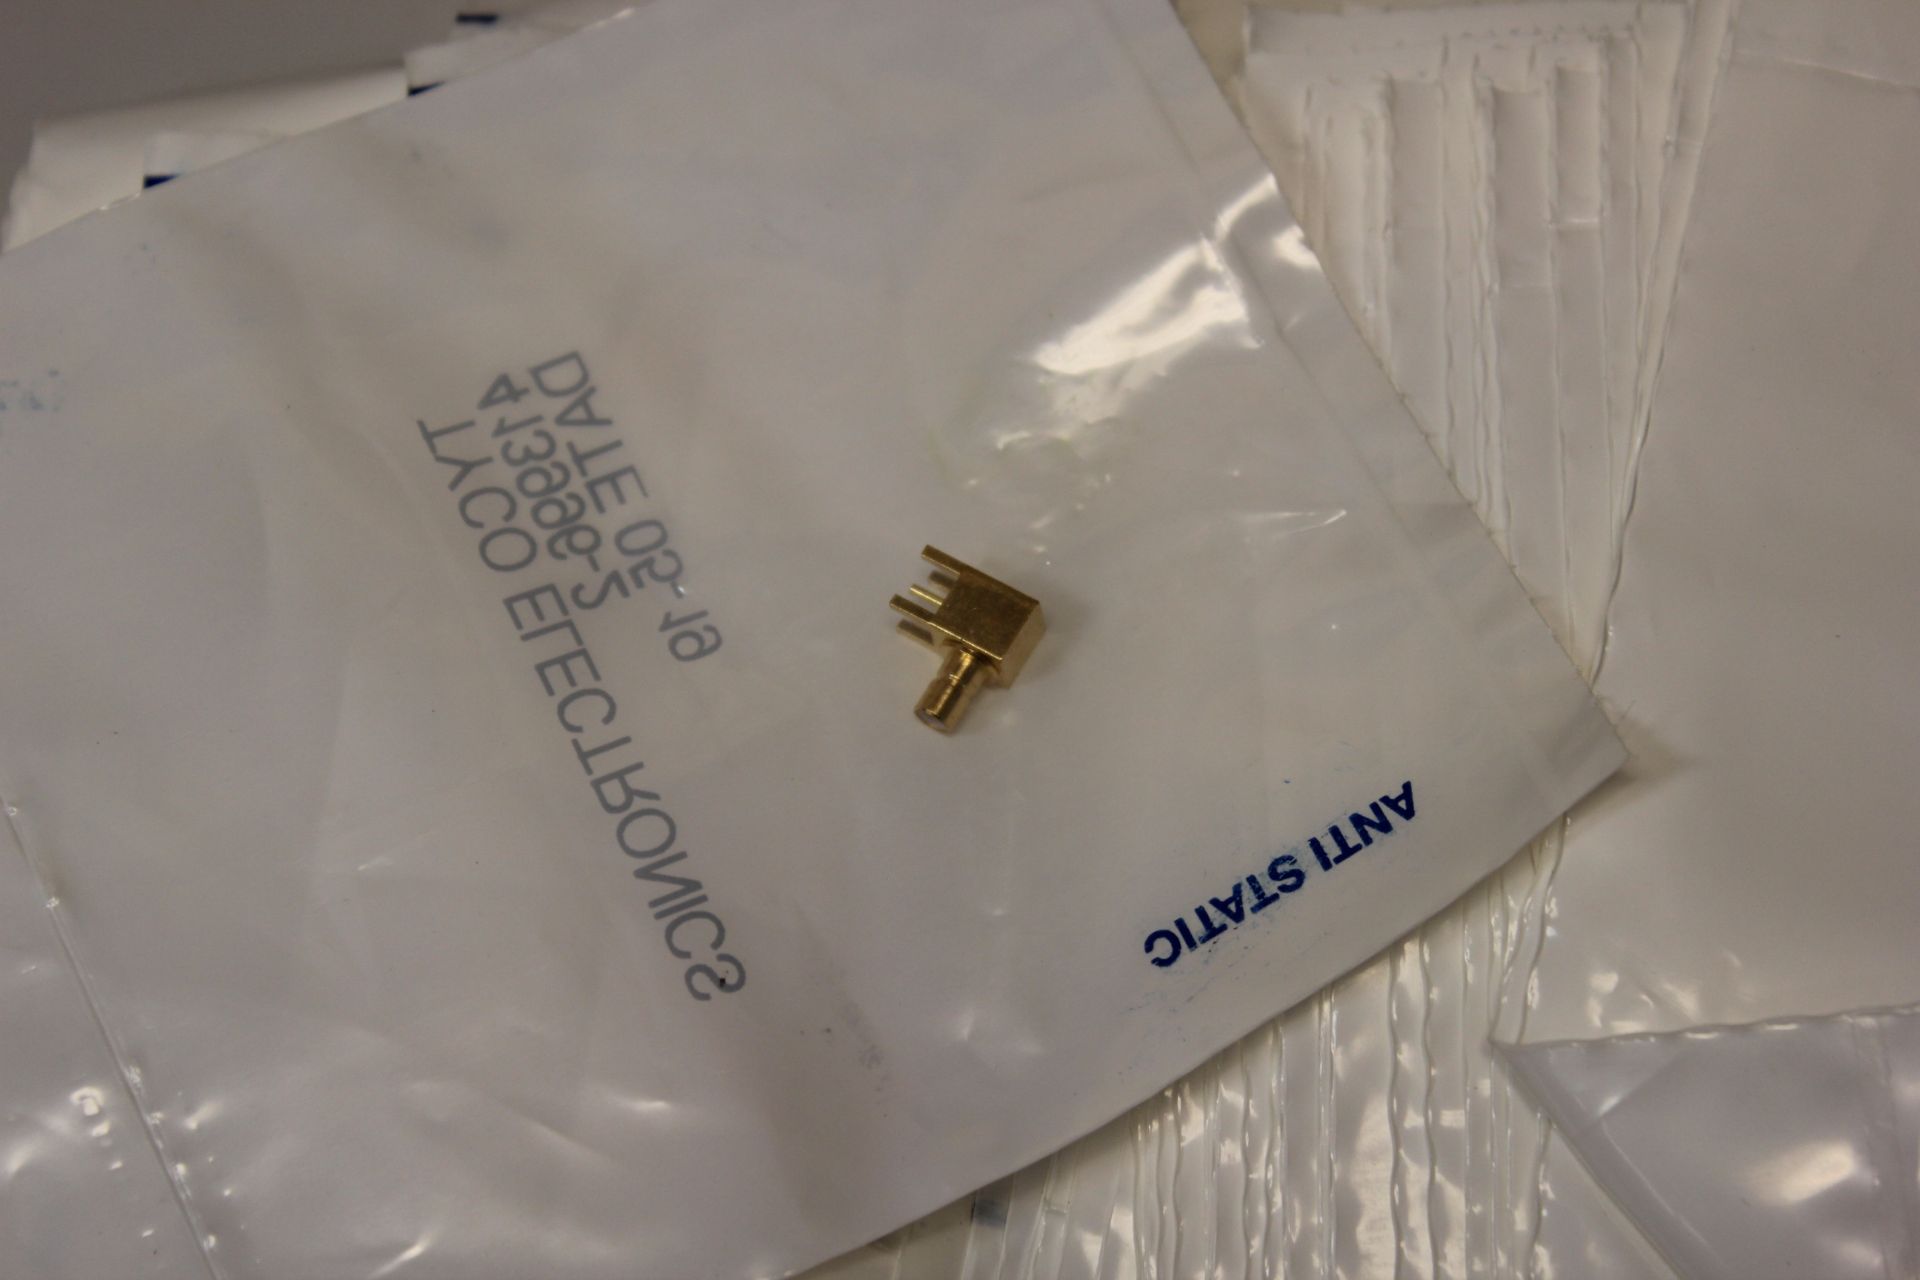 LOT OF NEW TYCO SMB PCB RF CONNECTORS - Image 3 of 3